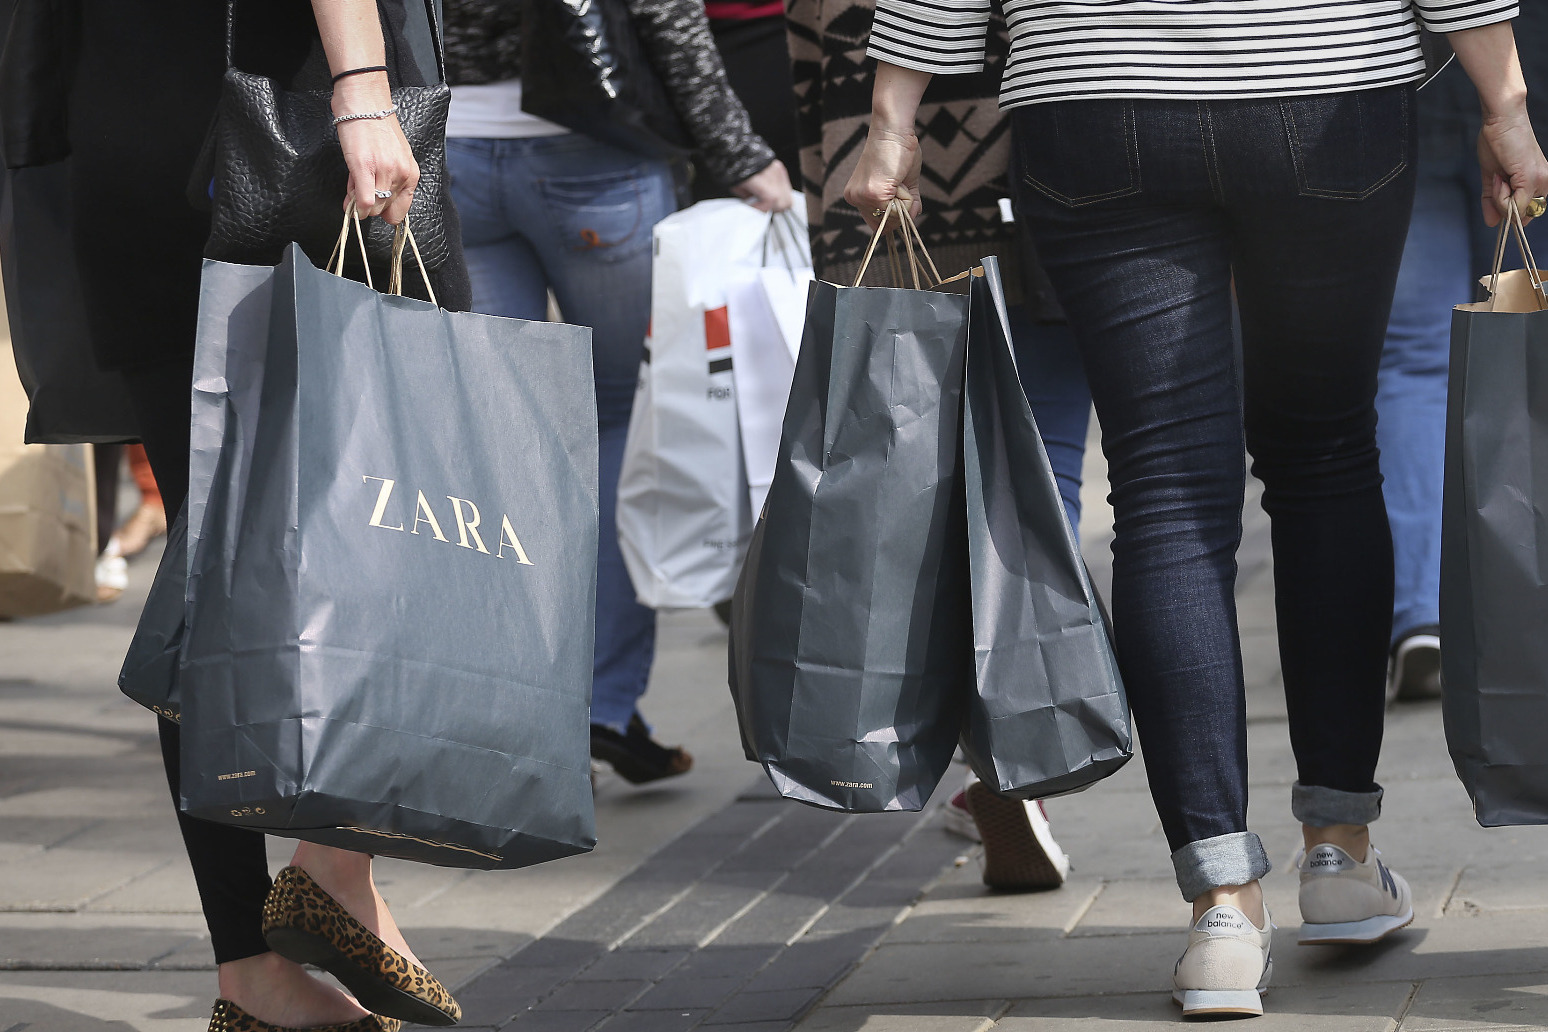 Retail sales return to growth as shoppers start Christmas spending early 